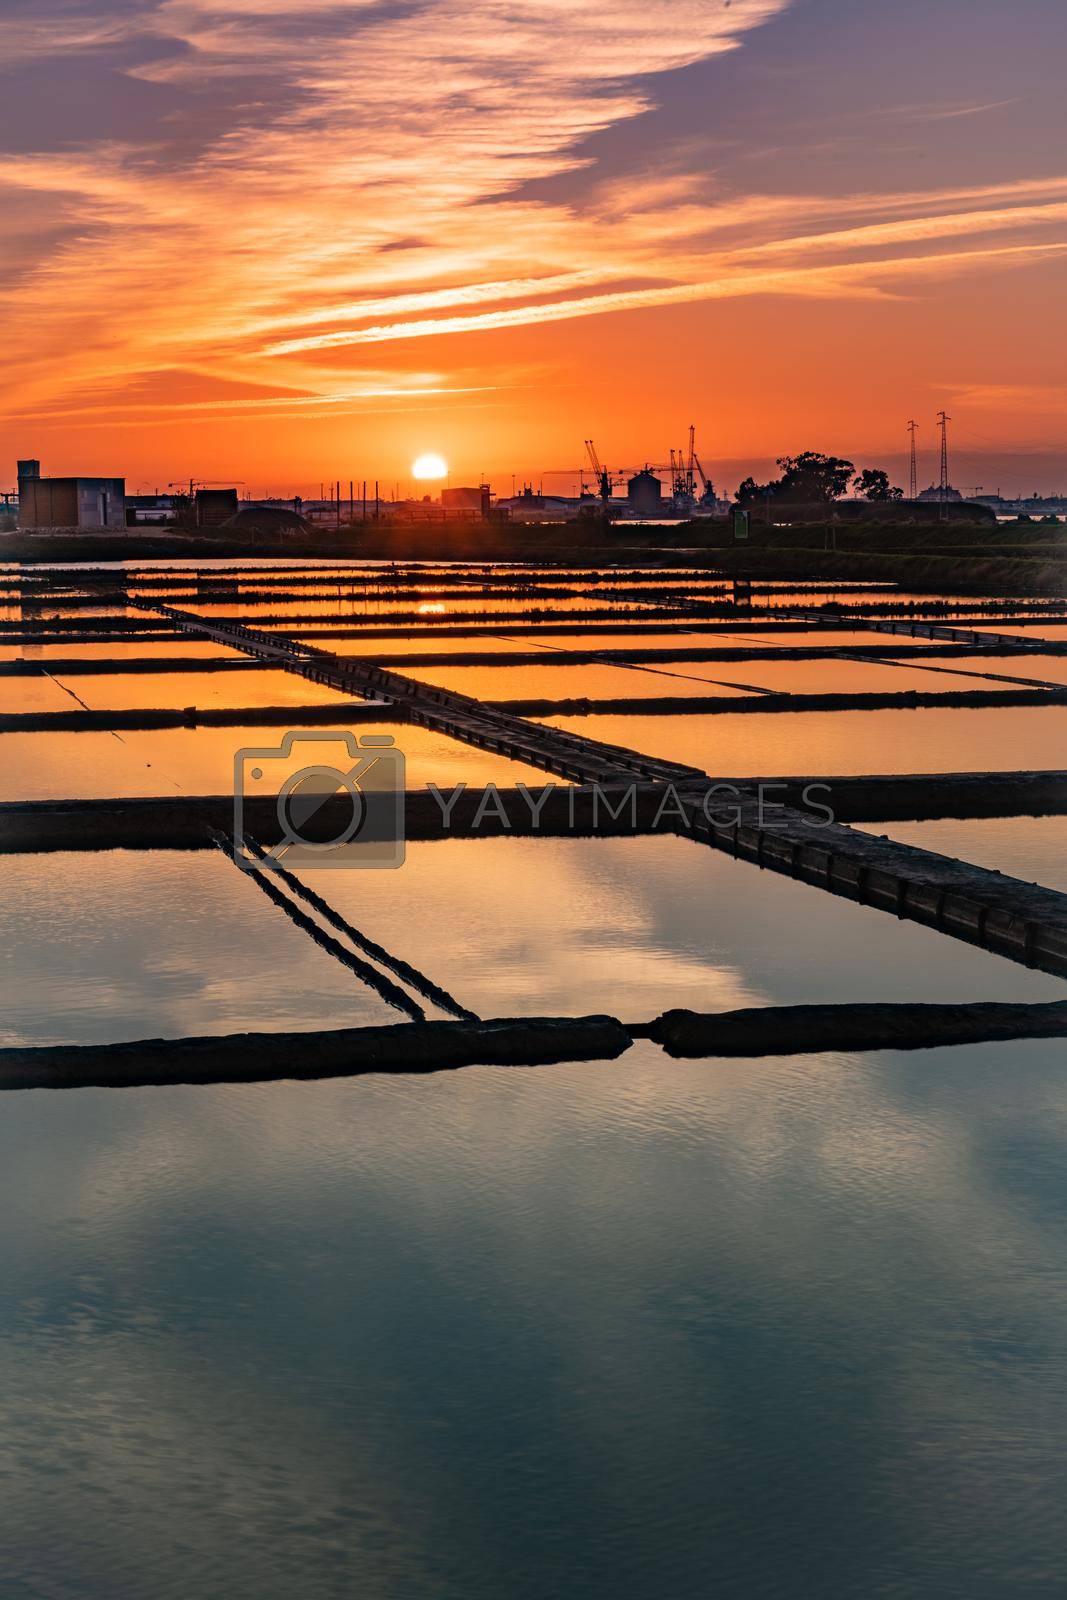 Royalty free image of Salt flats of Aveiro at sunset by homydesign